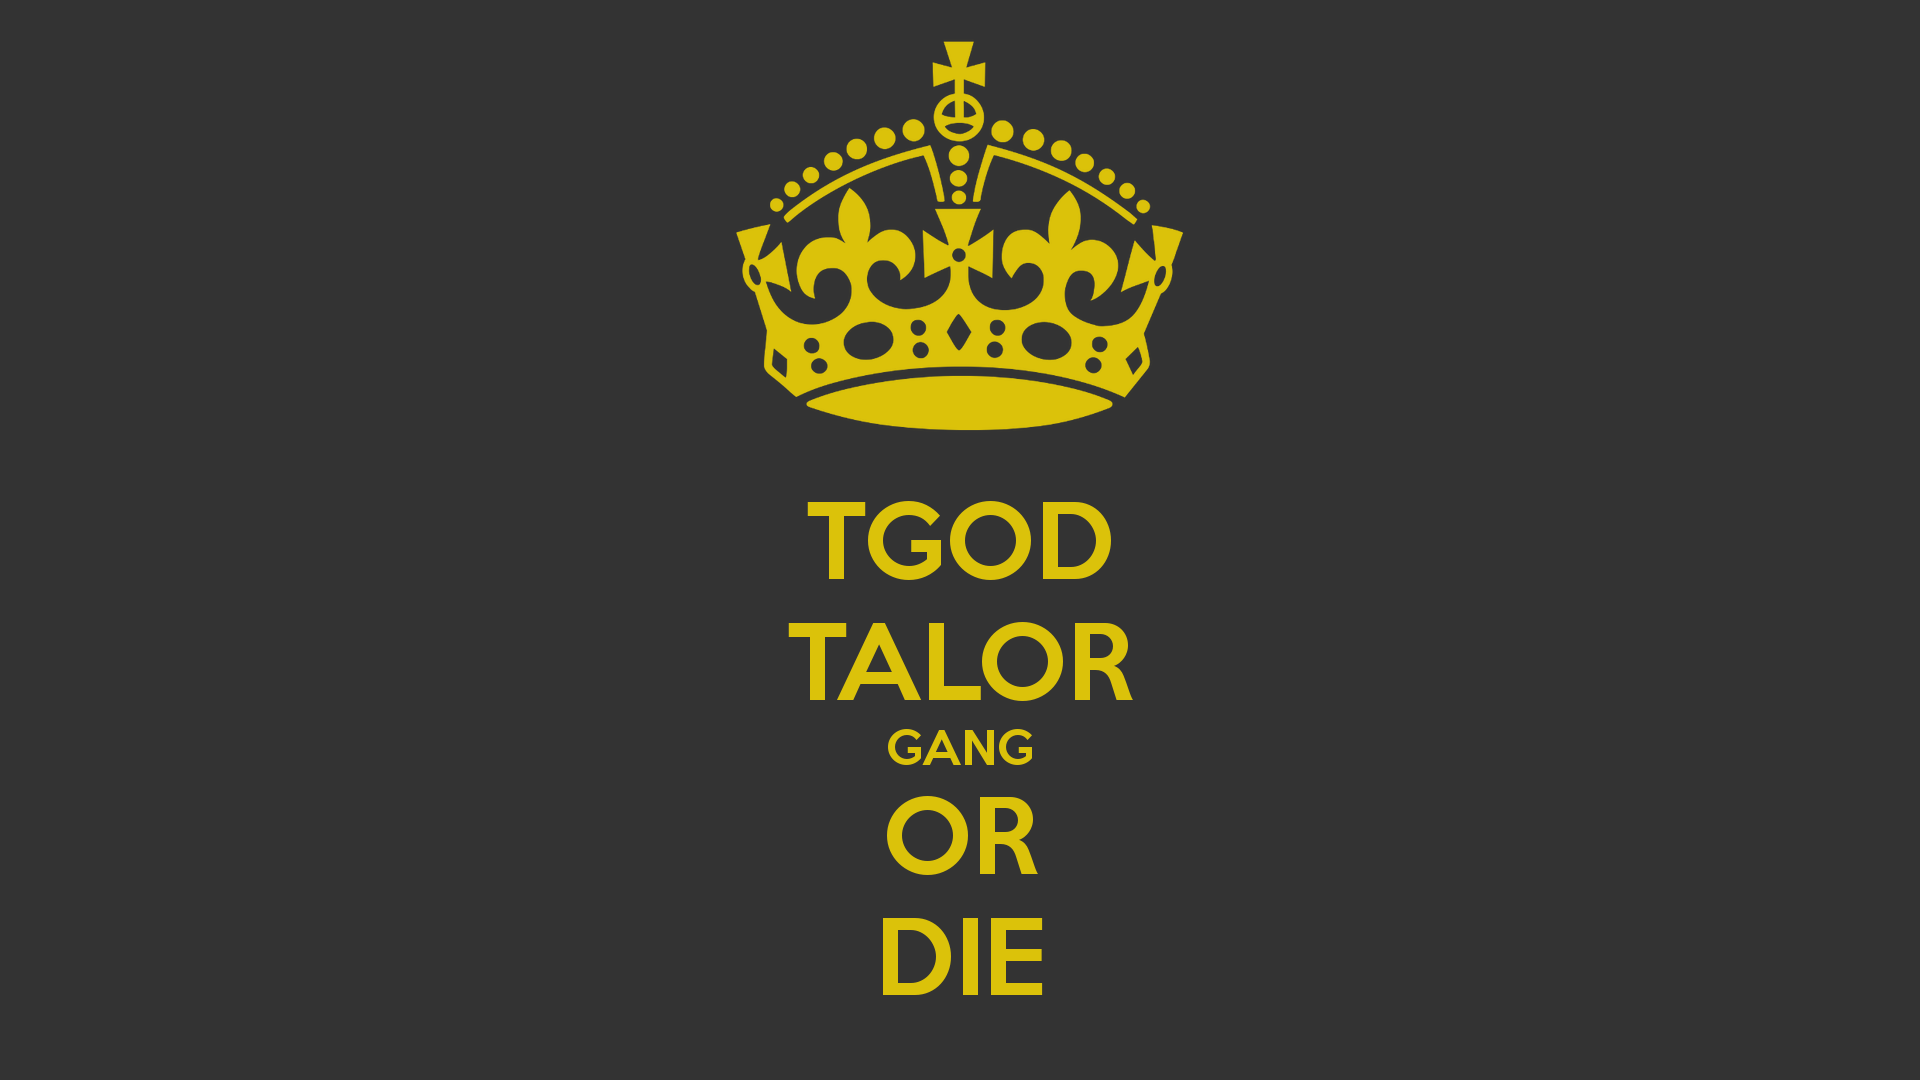 Tgod Talor Gang Or Die Keep Calm And Carry On Image Generator